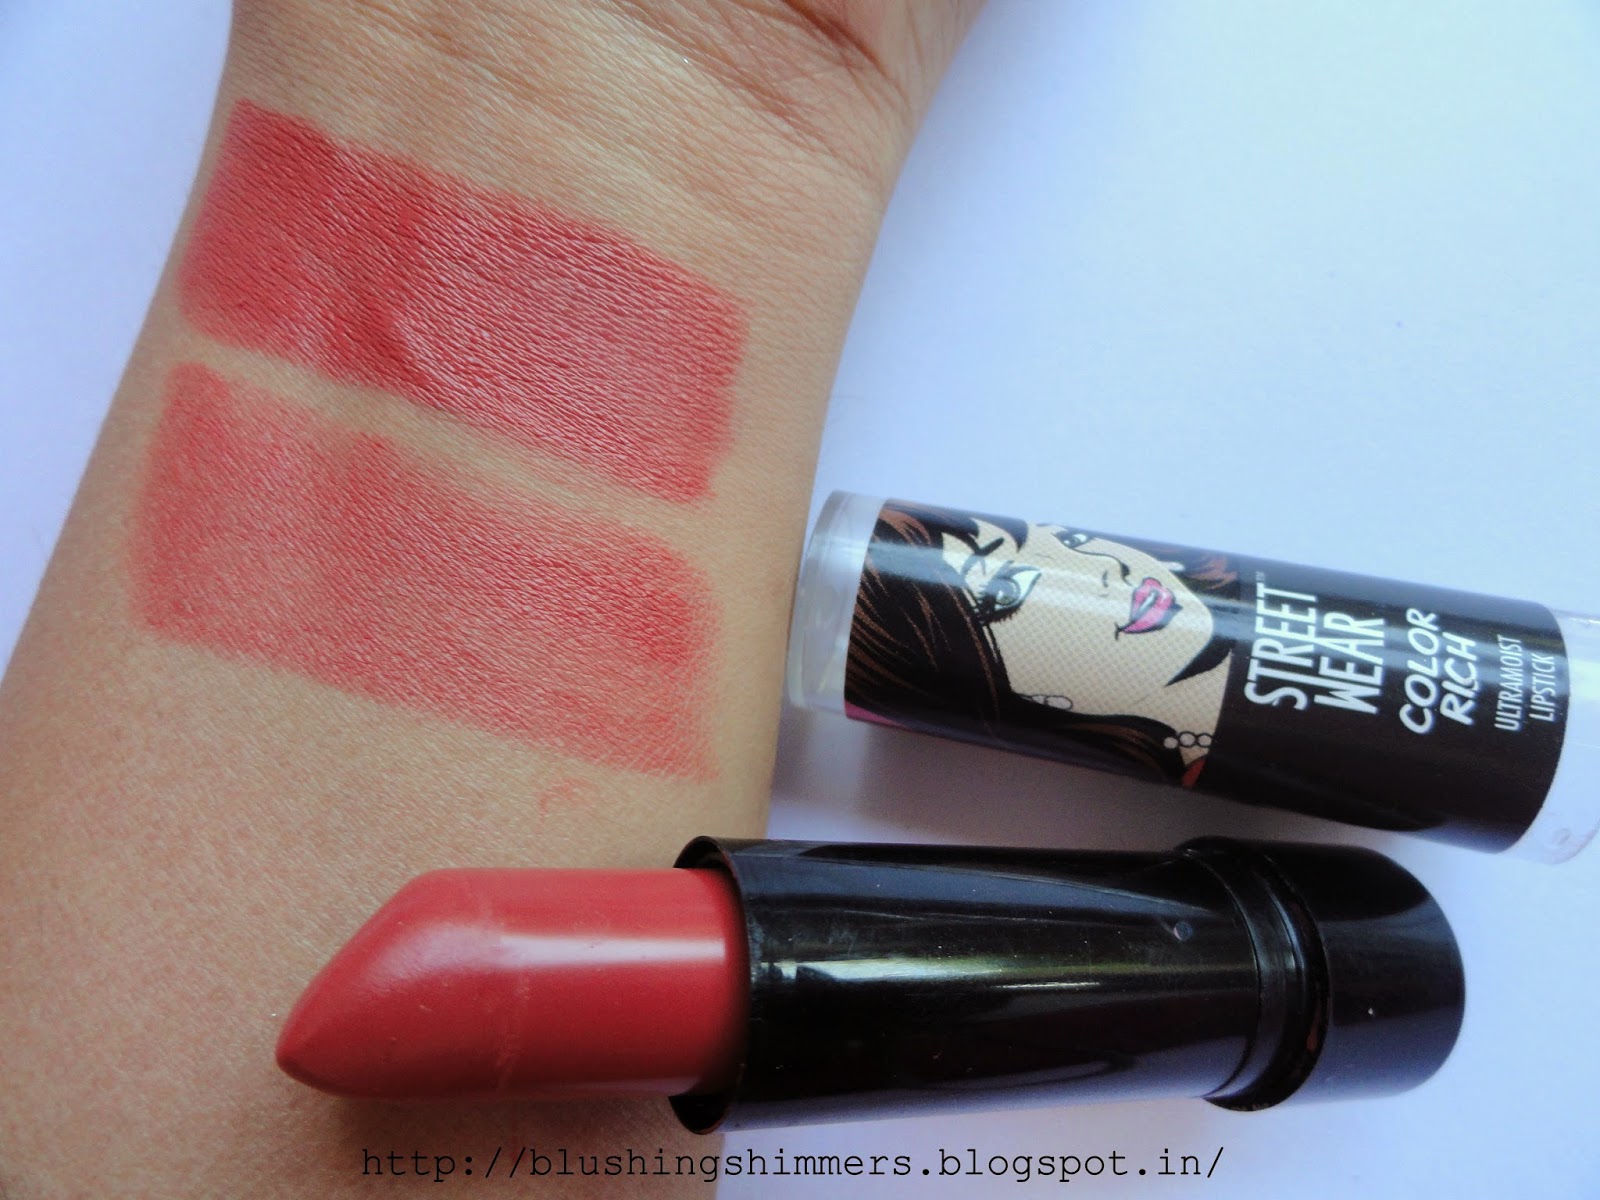 Street wear color rich ultra moist lipstick-Berry Dreamy review,swatches